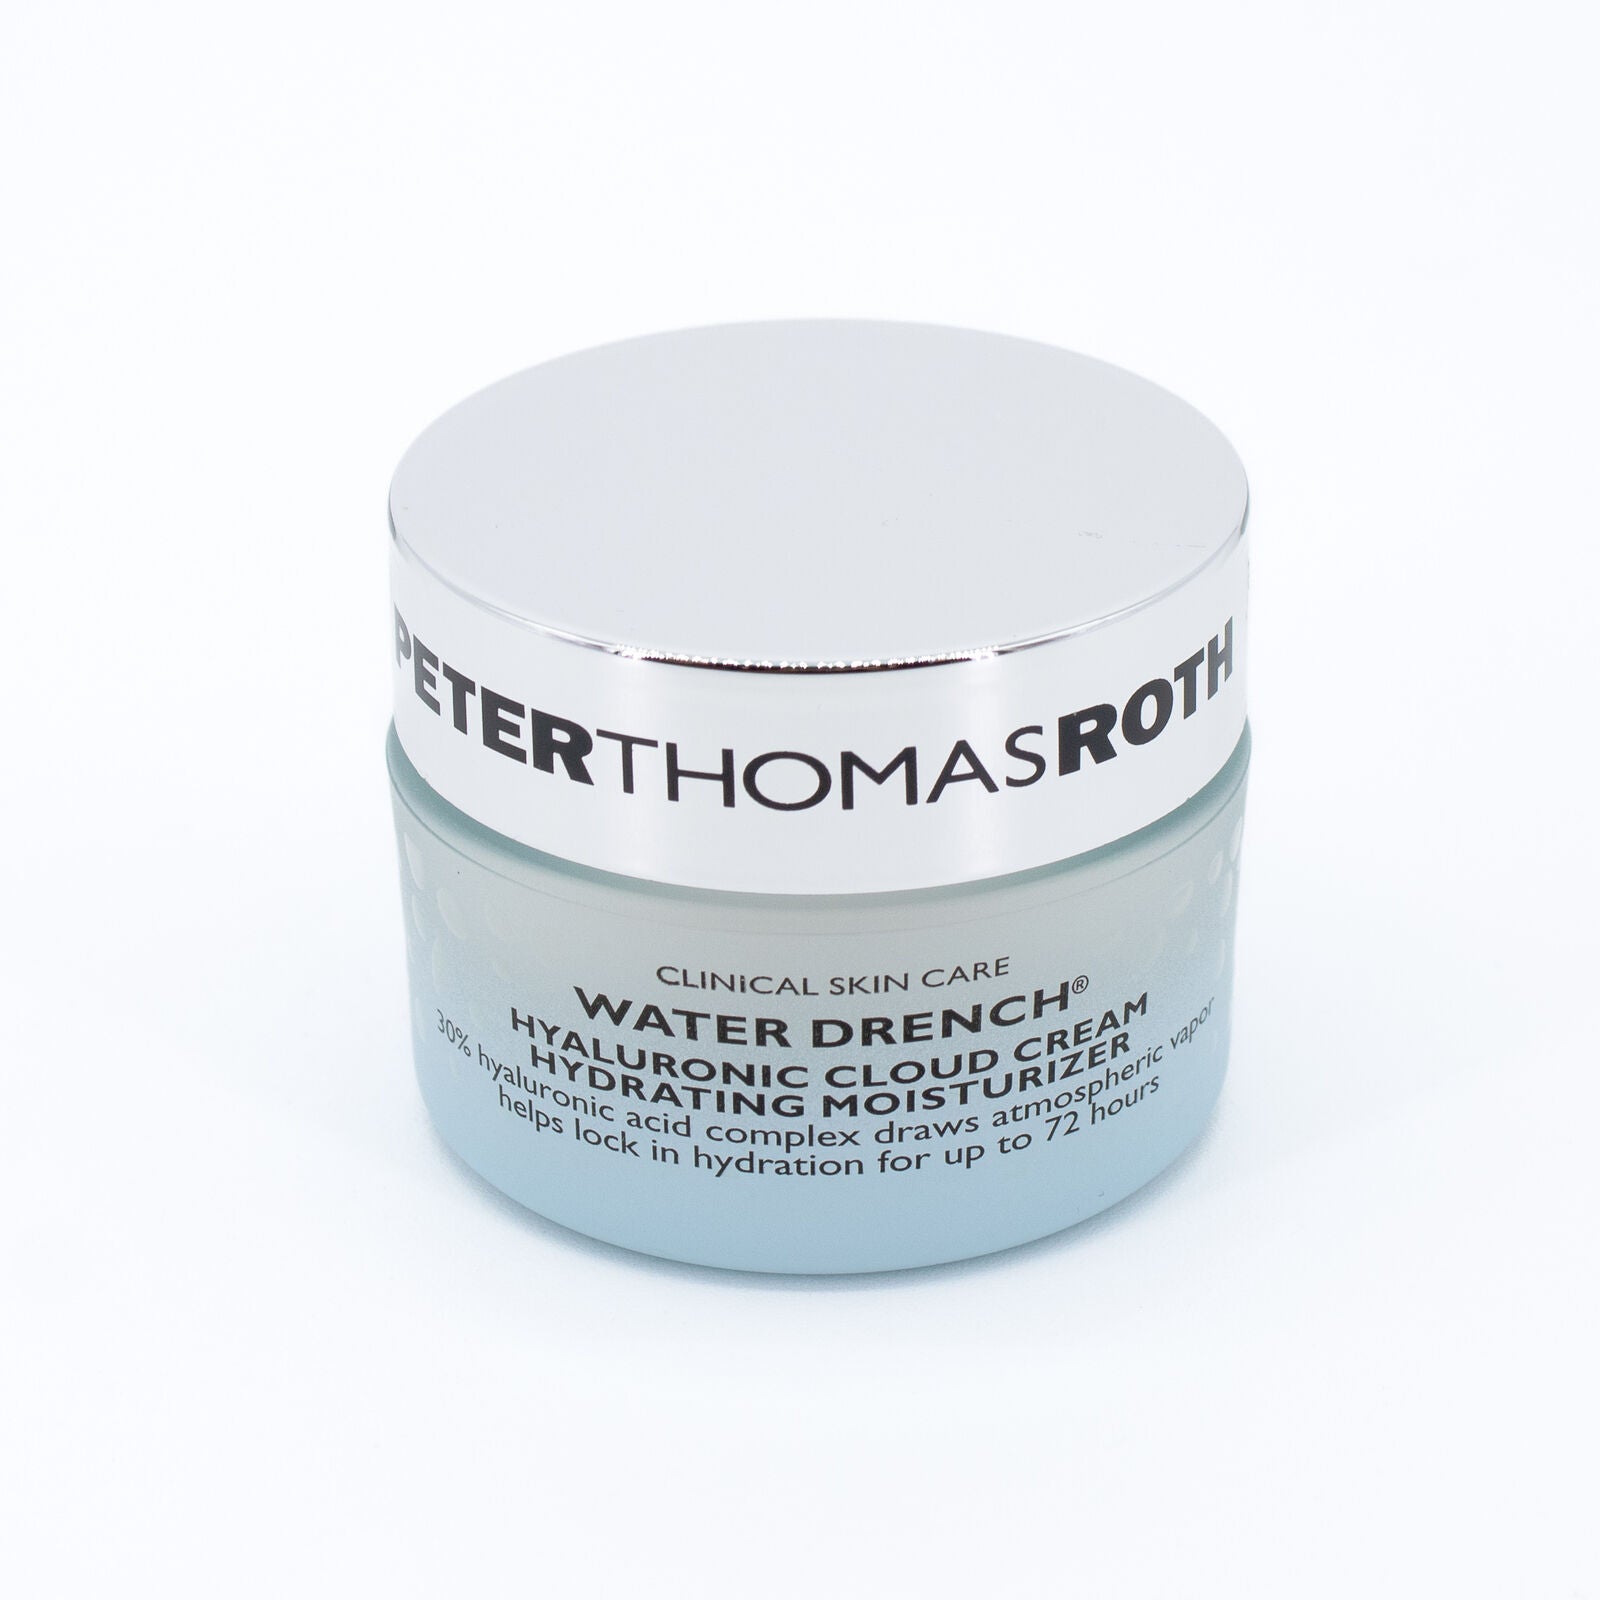 PETERTHOMASROTH Water Drench Hyaluronic Cloud Cream 0.67oz - Missing Box